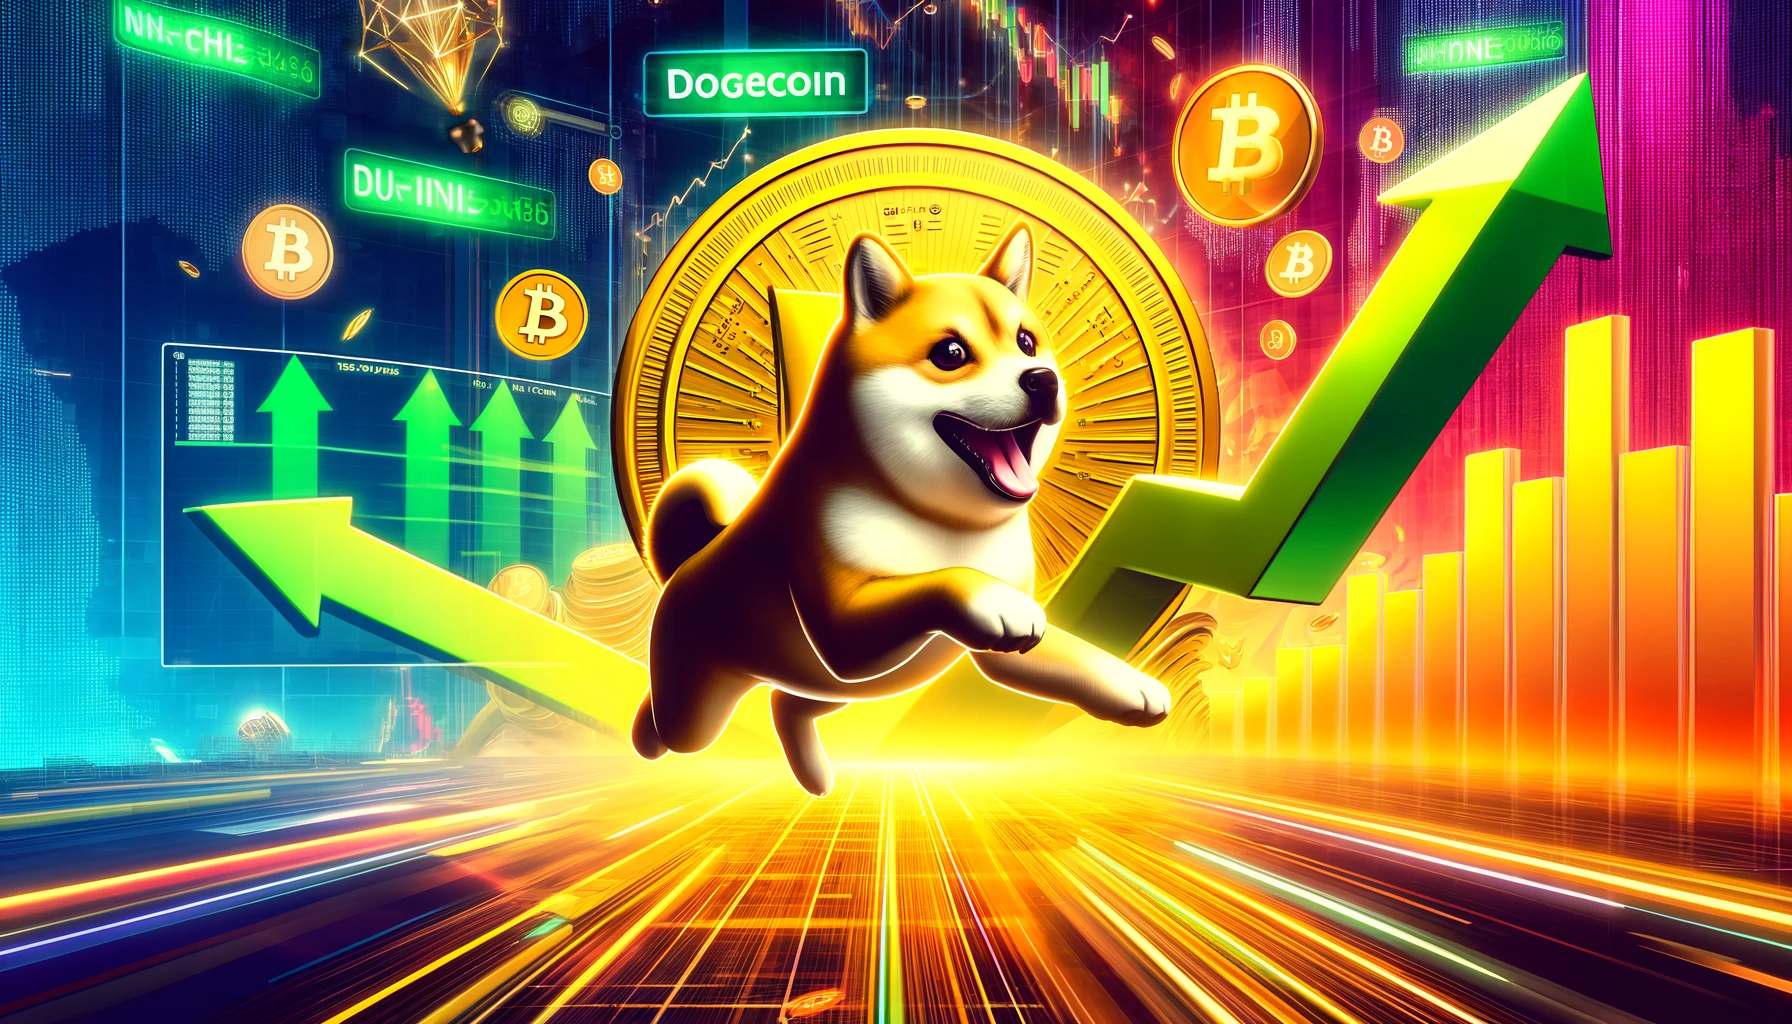 It’s Almost Time For A Good Dogecoin Pump, Analyst Says